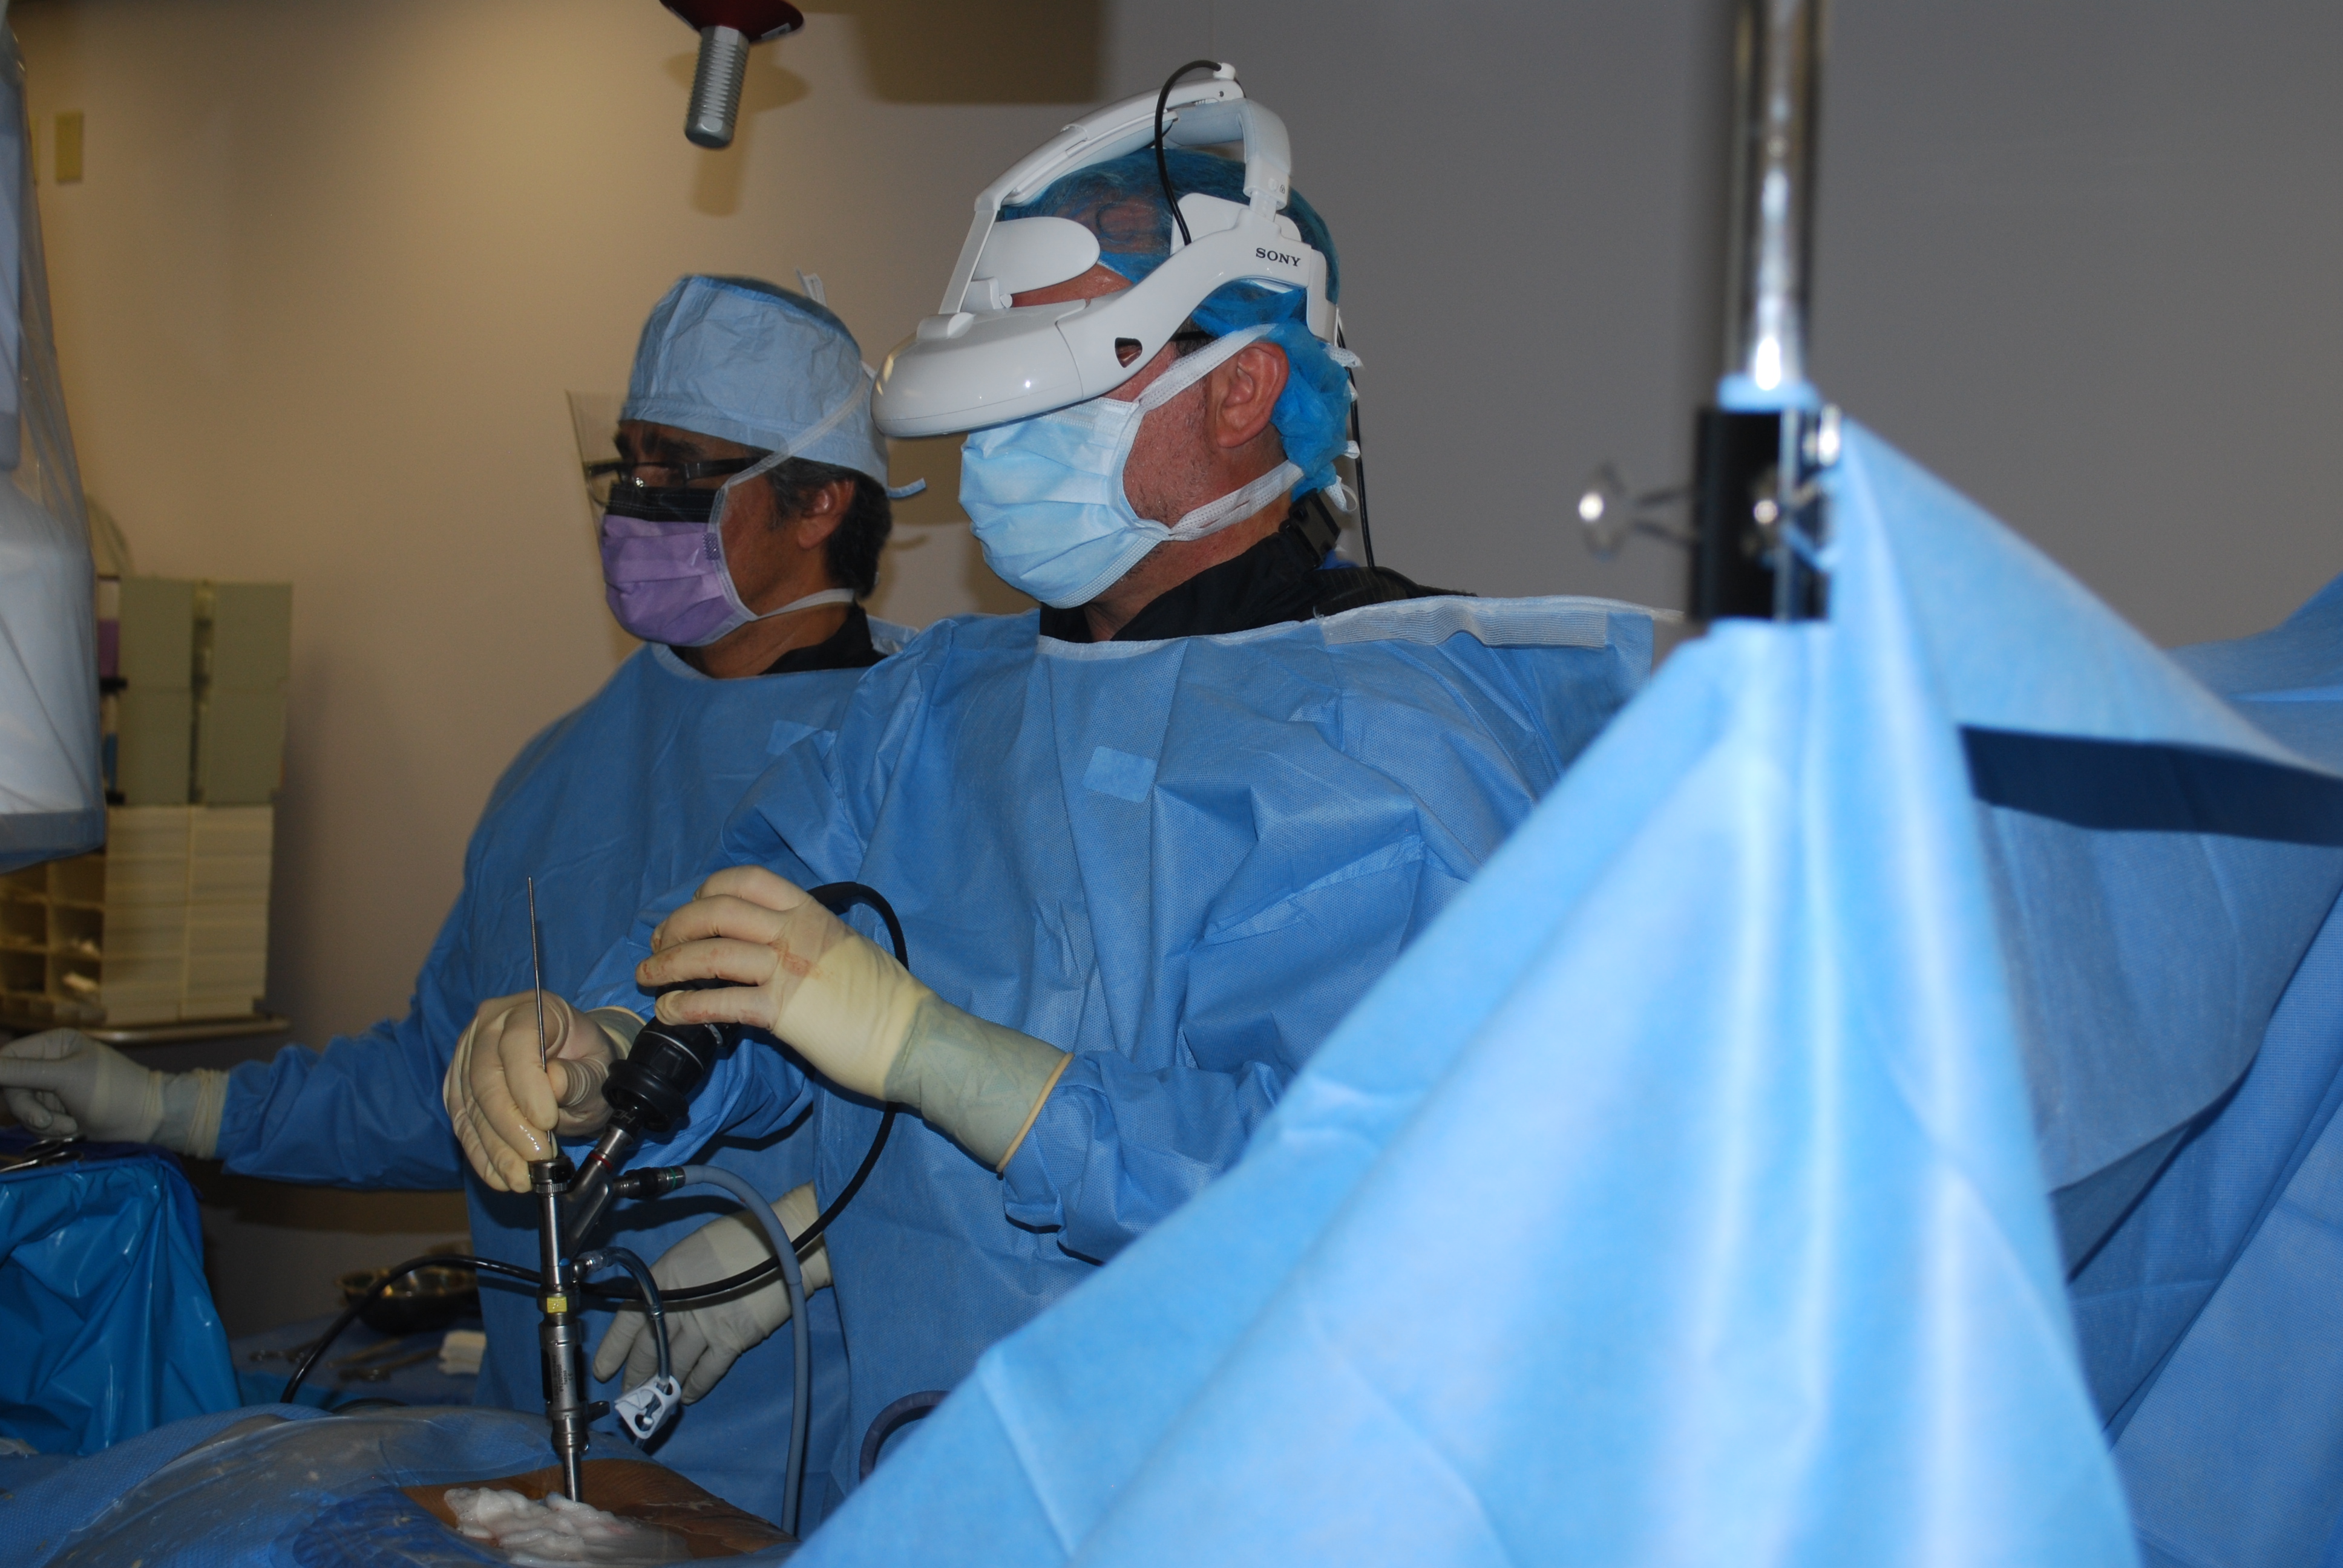 Dr. Rappard performs a spinal procedure with the new Sony heads-up-display for surgeons